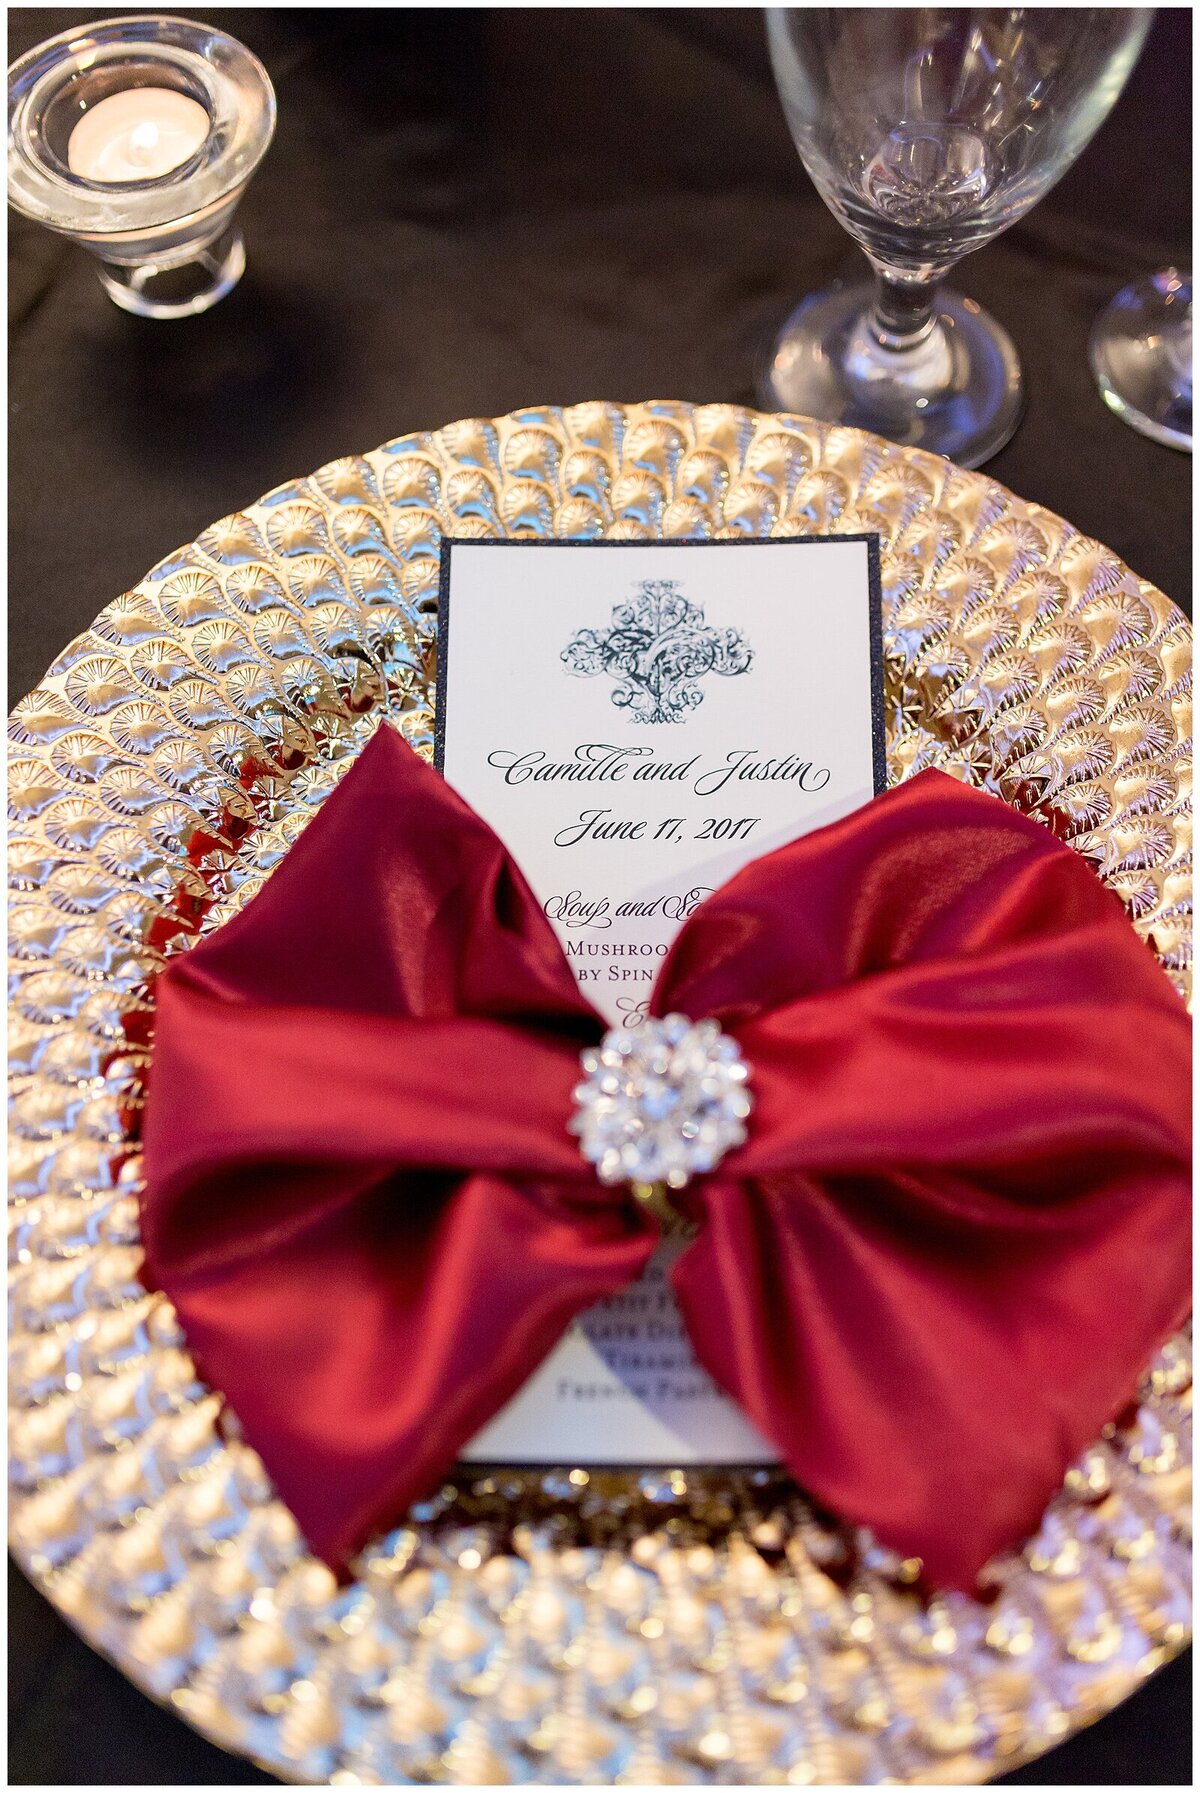 sharpe-stationery-and-printing-red-gold-place-setting-with-custom-menu